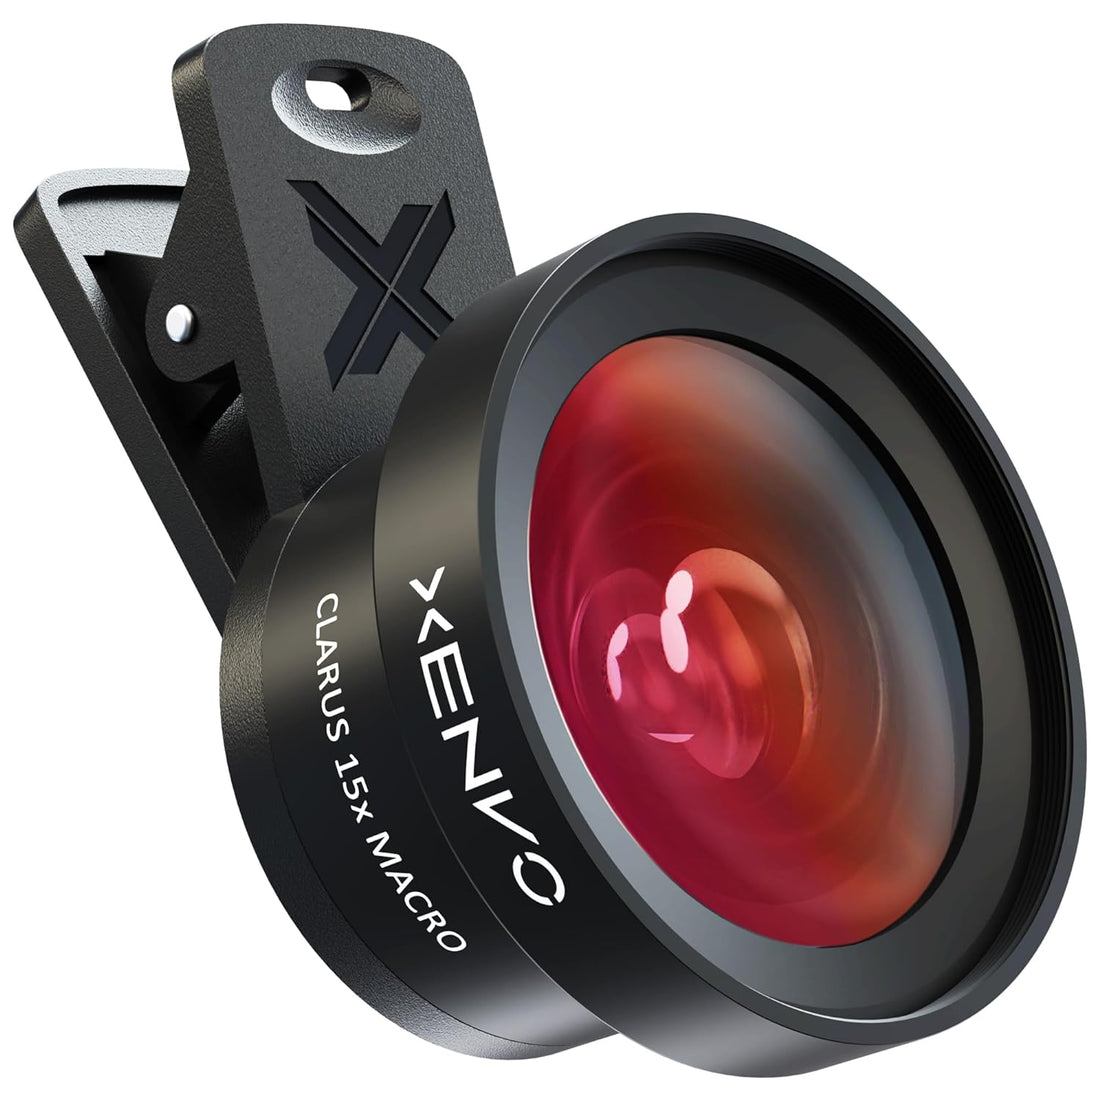 Xenvo iPhone Camera Lens Pro: Macro Lens & Wide Angle Lens Kit with LED Light, Clip-On Cell Phone Camera Lenses for iPhone, Android, Samsung Mobile Phones and Tablets